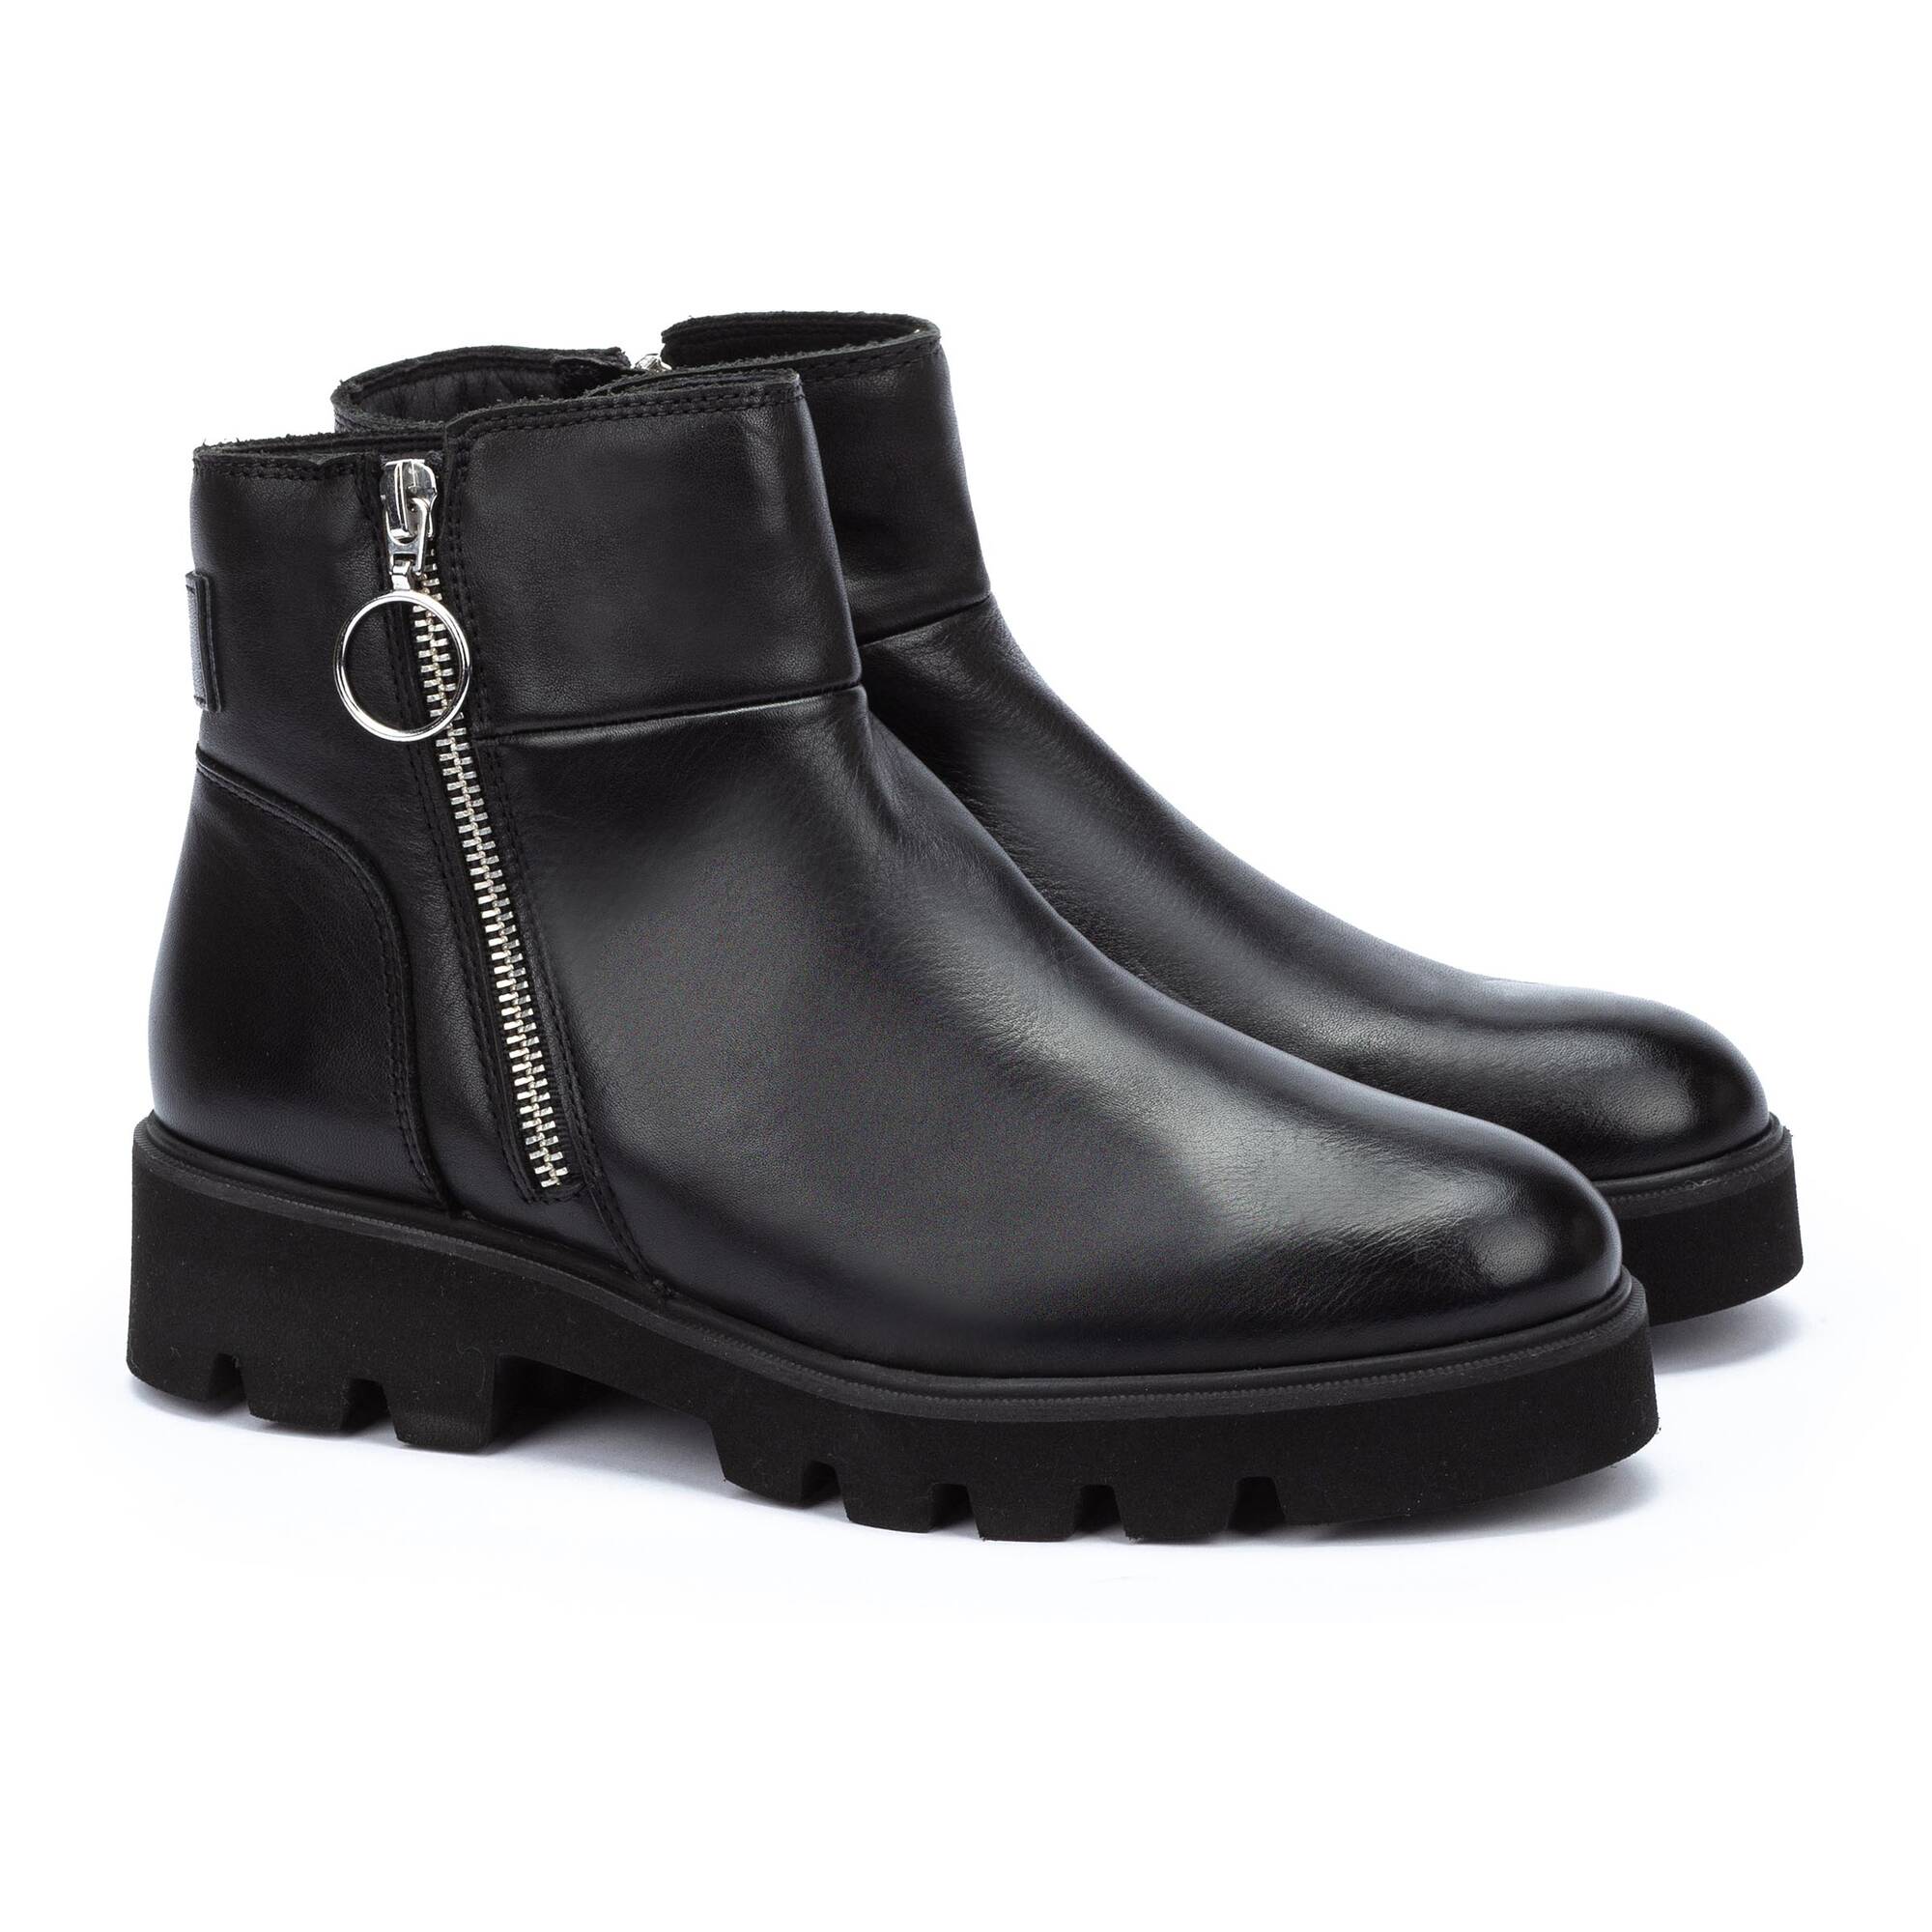 Ankle boots | SALAMANCA W6Y-8956, BLACK, large image number 20 | null